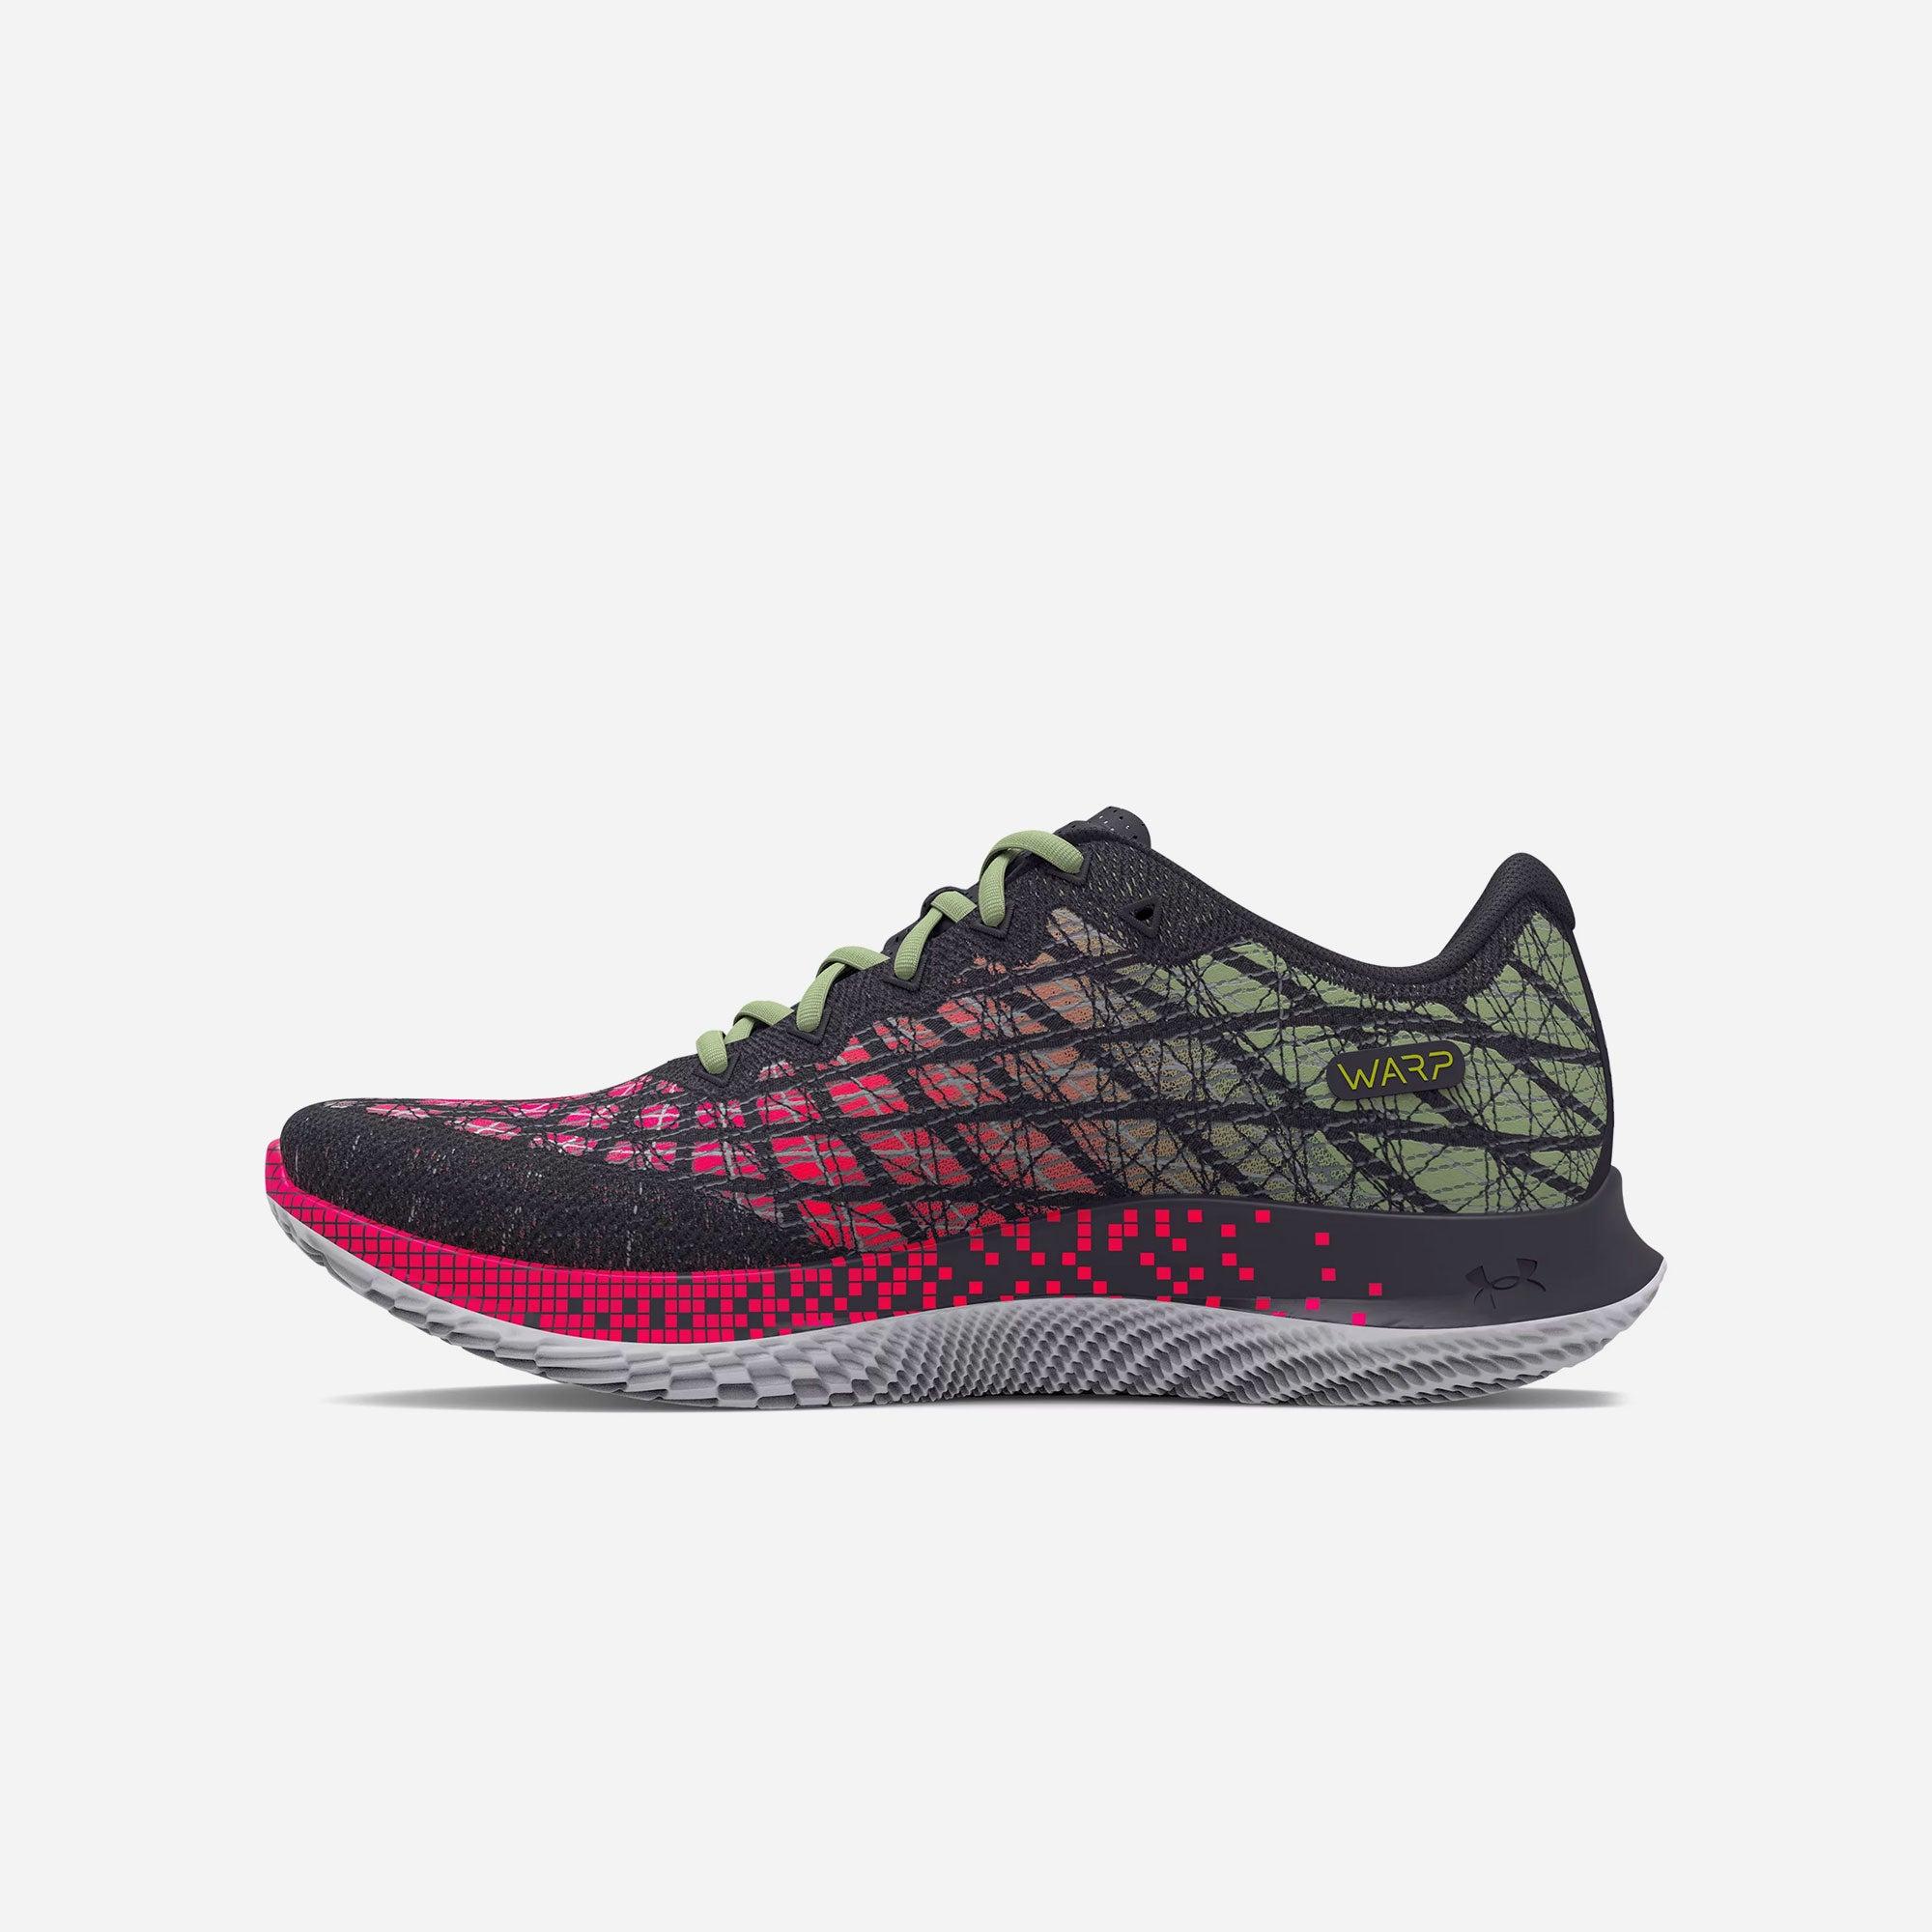 Giày thể thao nam Under Armour Flow Velociti Wind2 Grd - 3025158-100